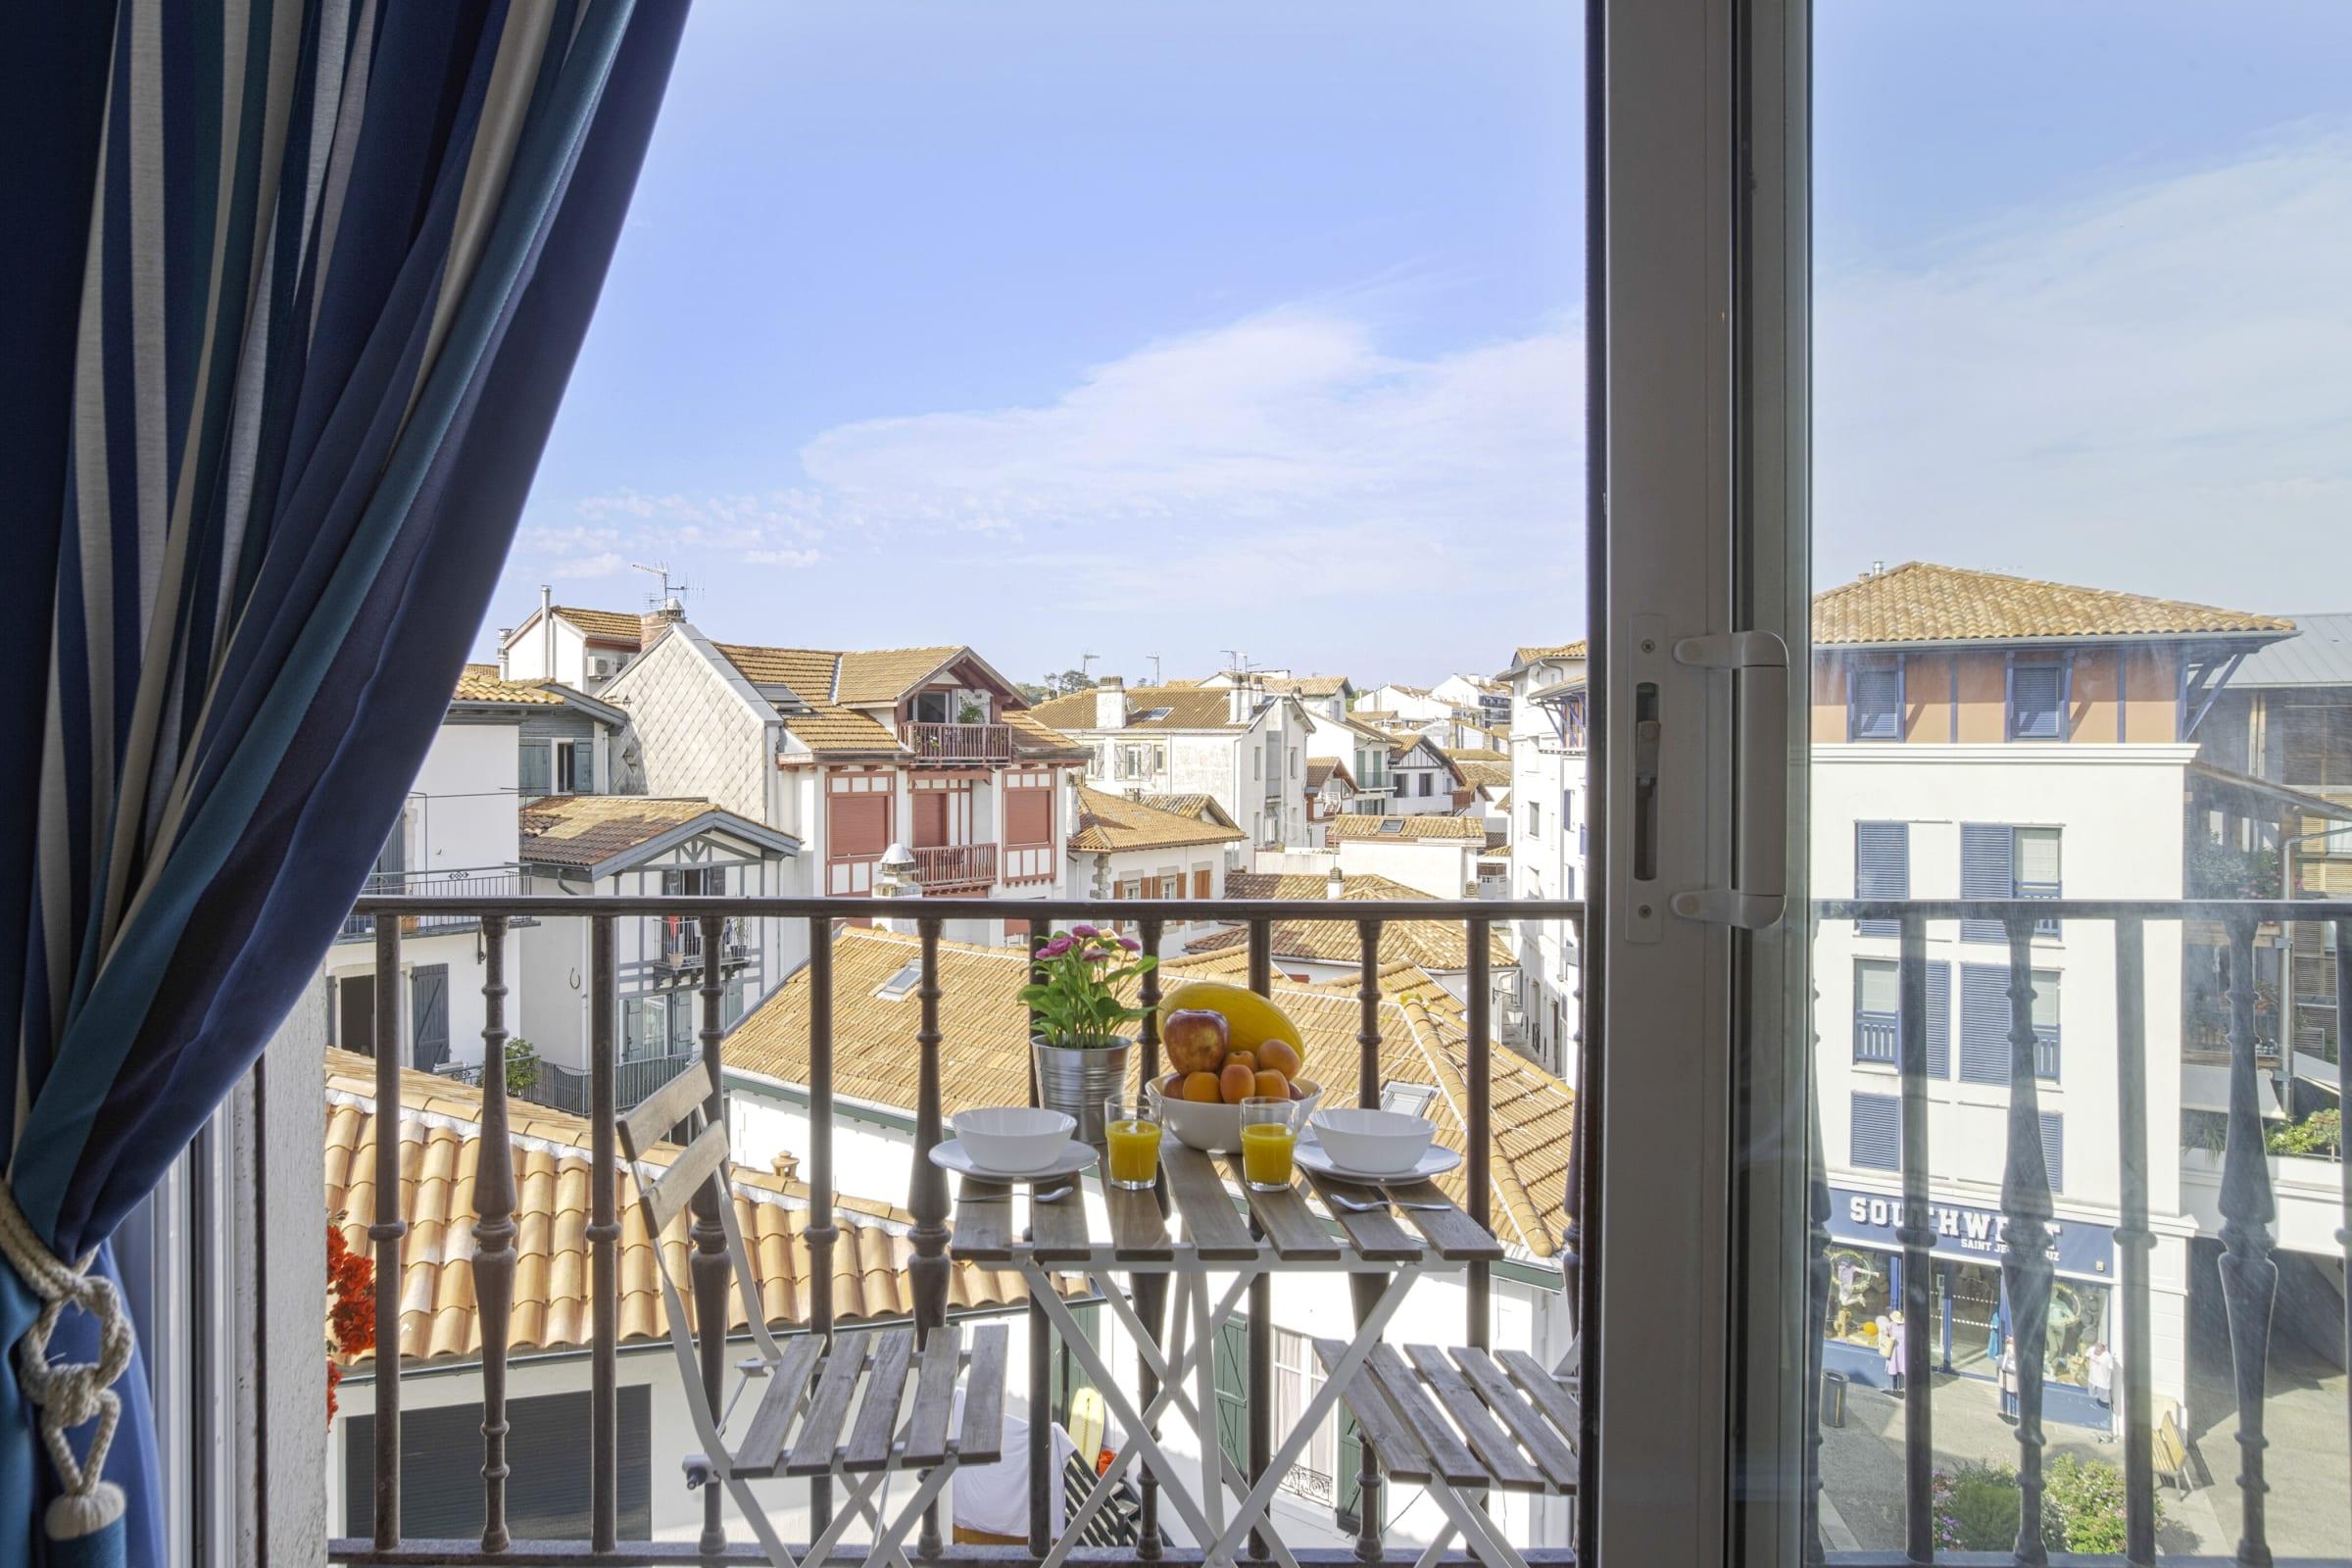 Property Image 2 - Superb flat with balcony in the heart of Saint-Jean-de-Luz